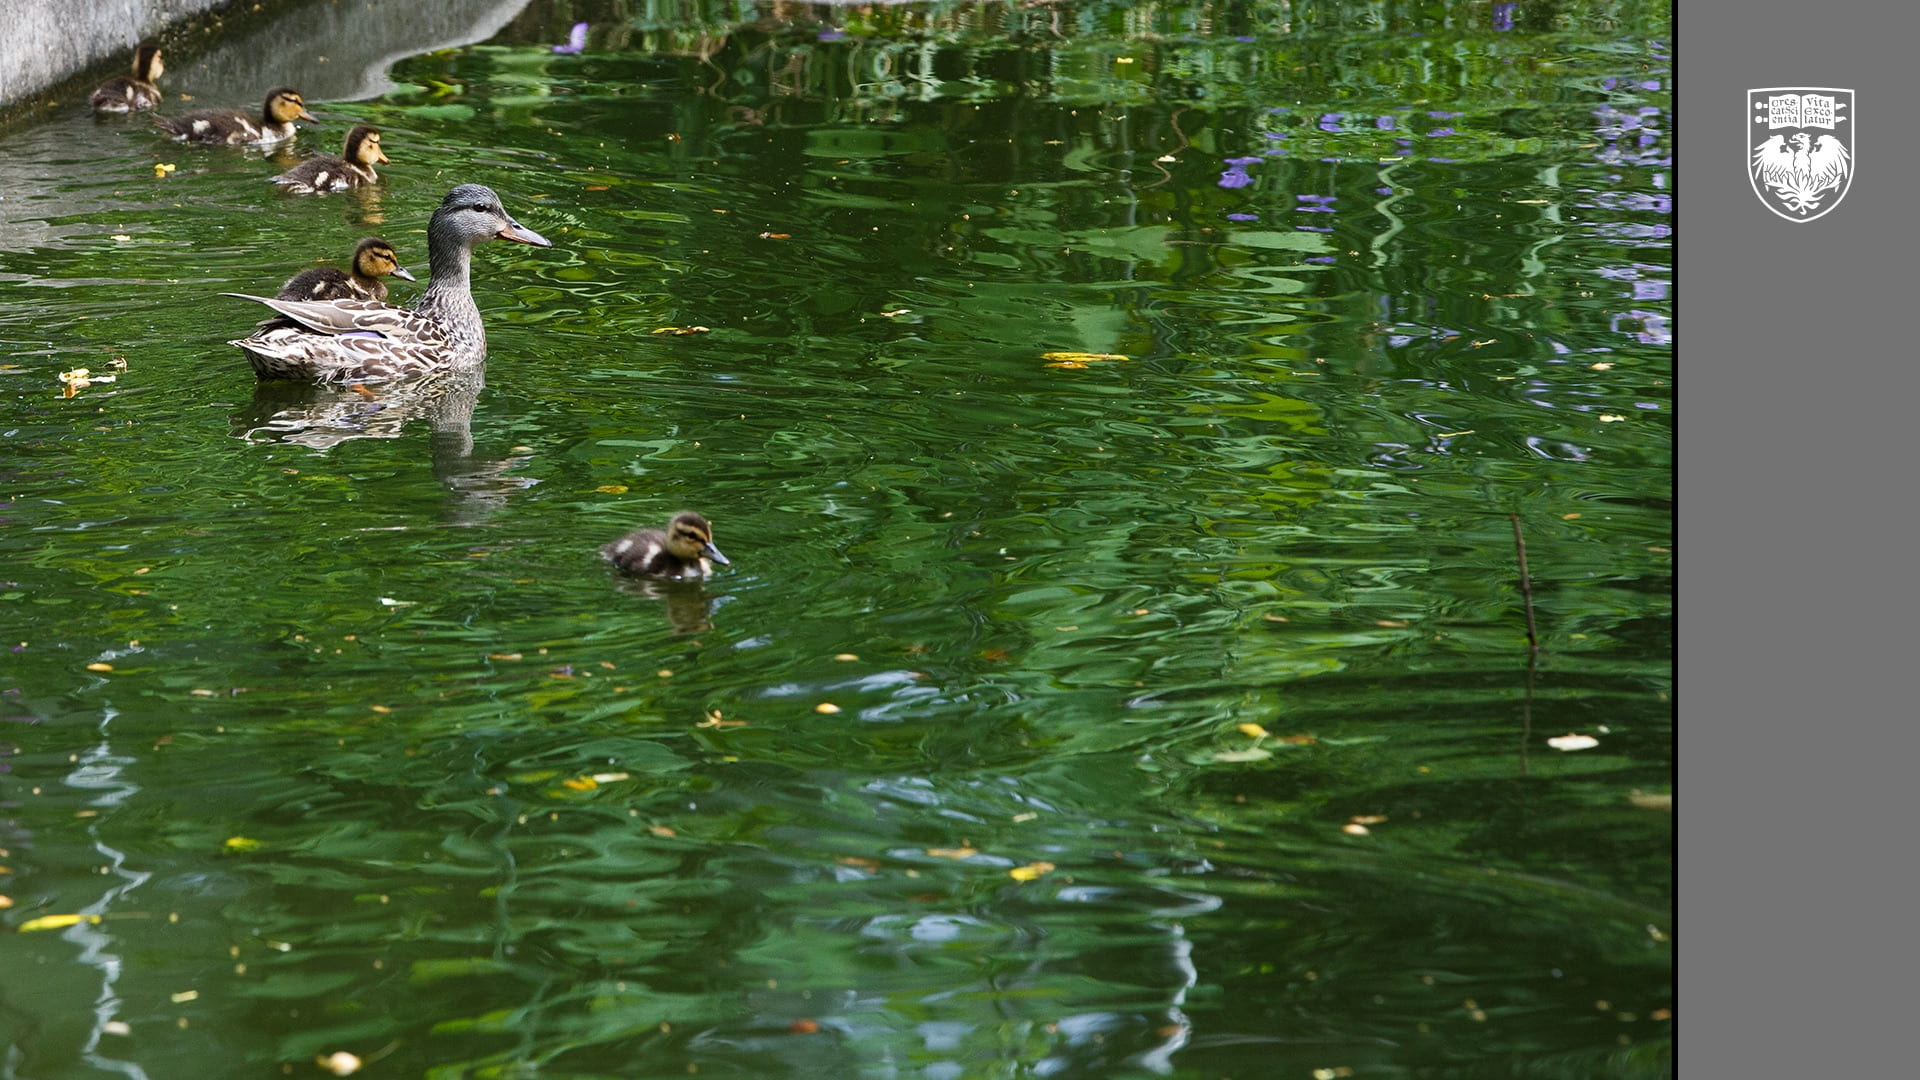 Mother duck and five duckling swimming in green water